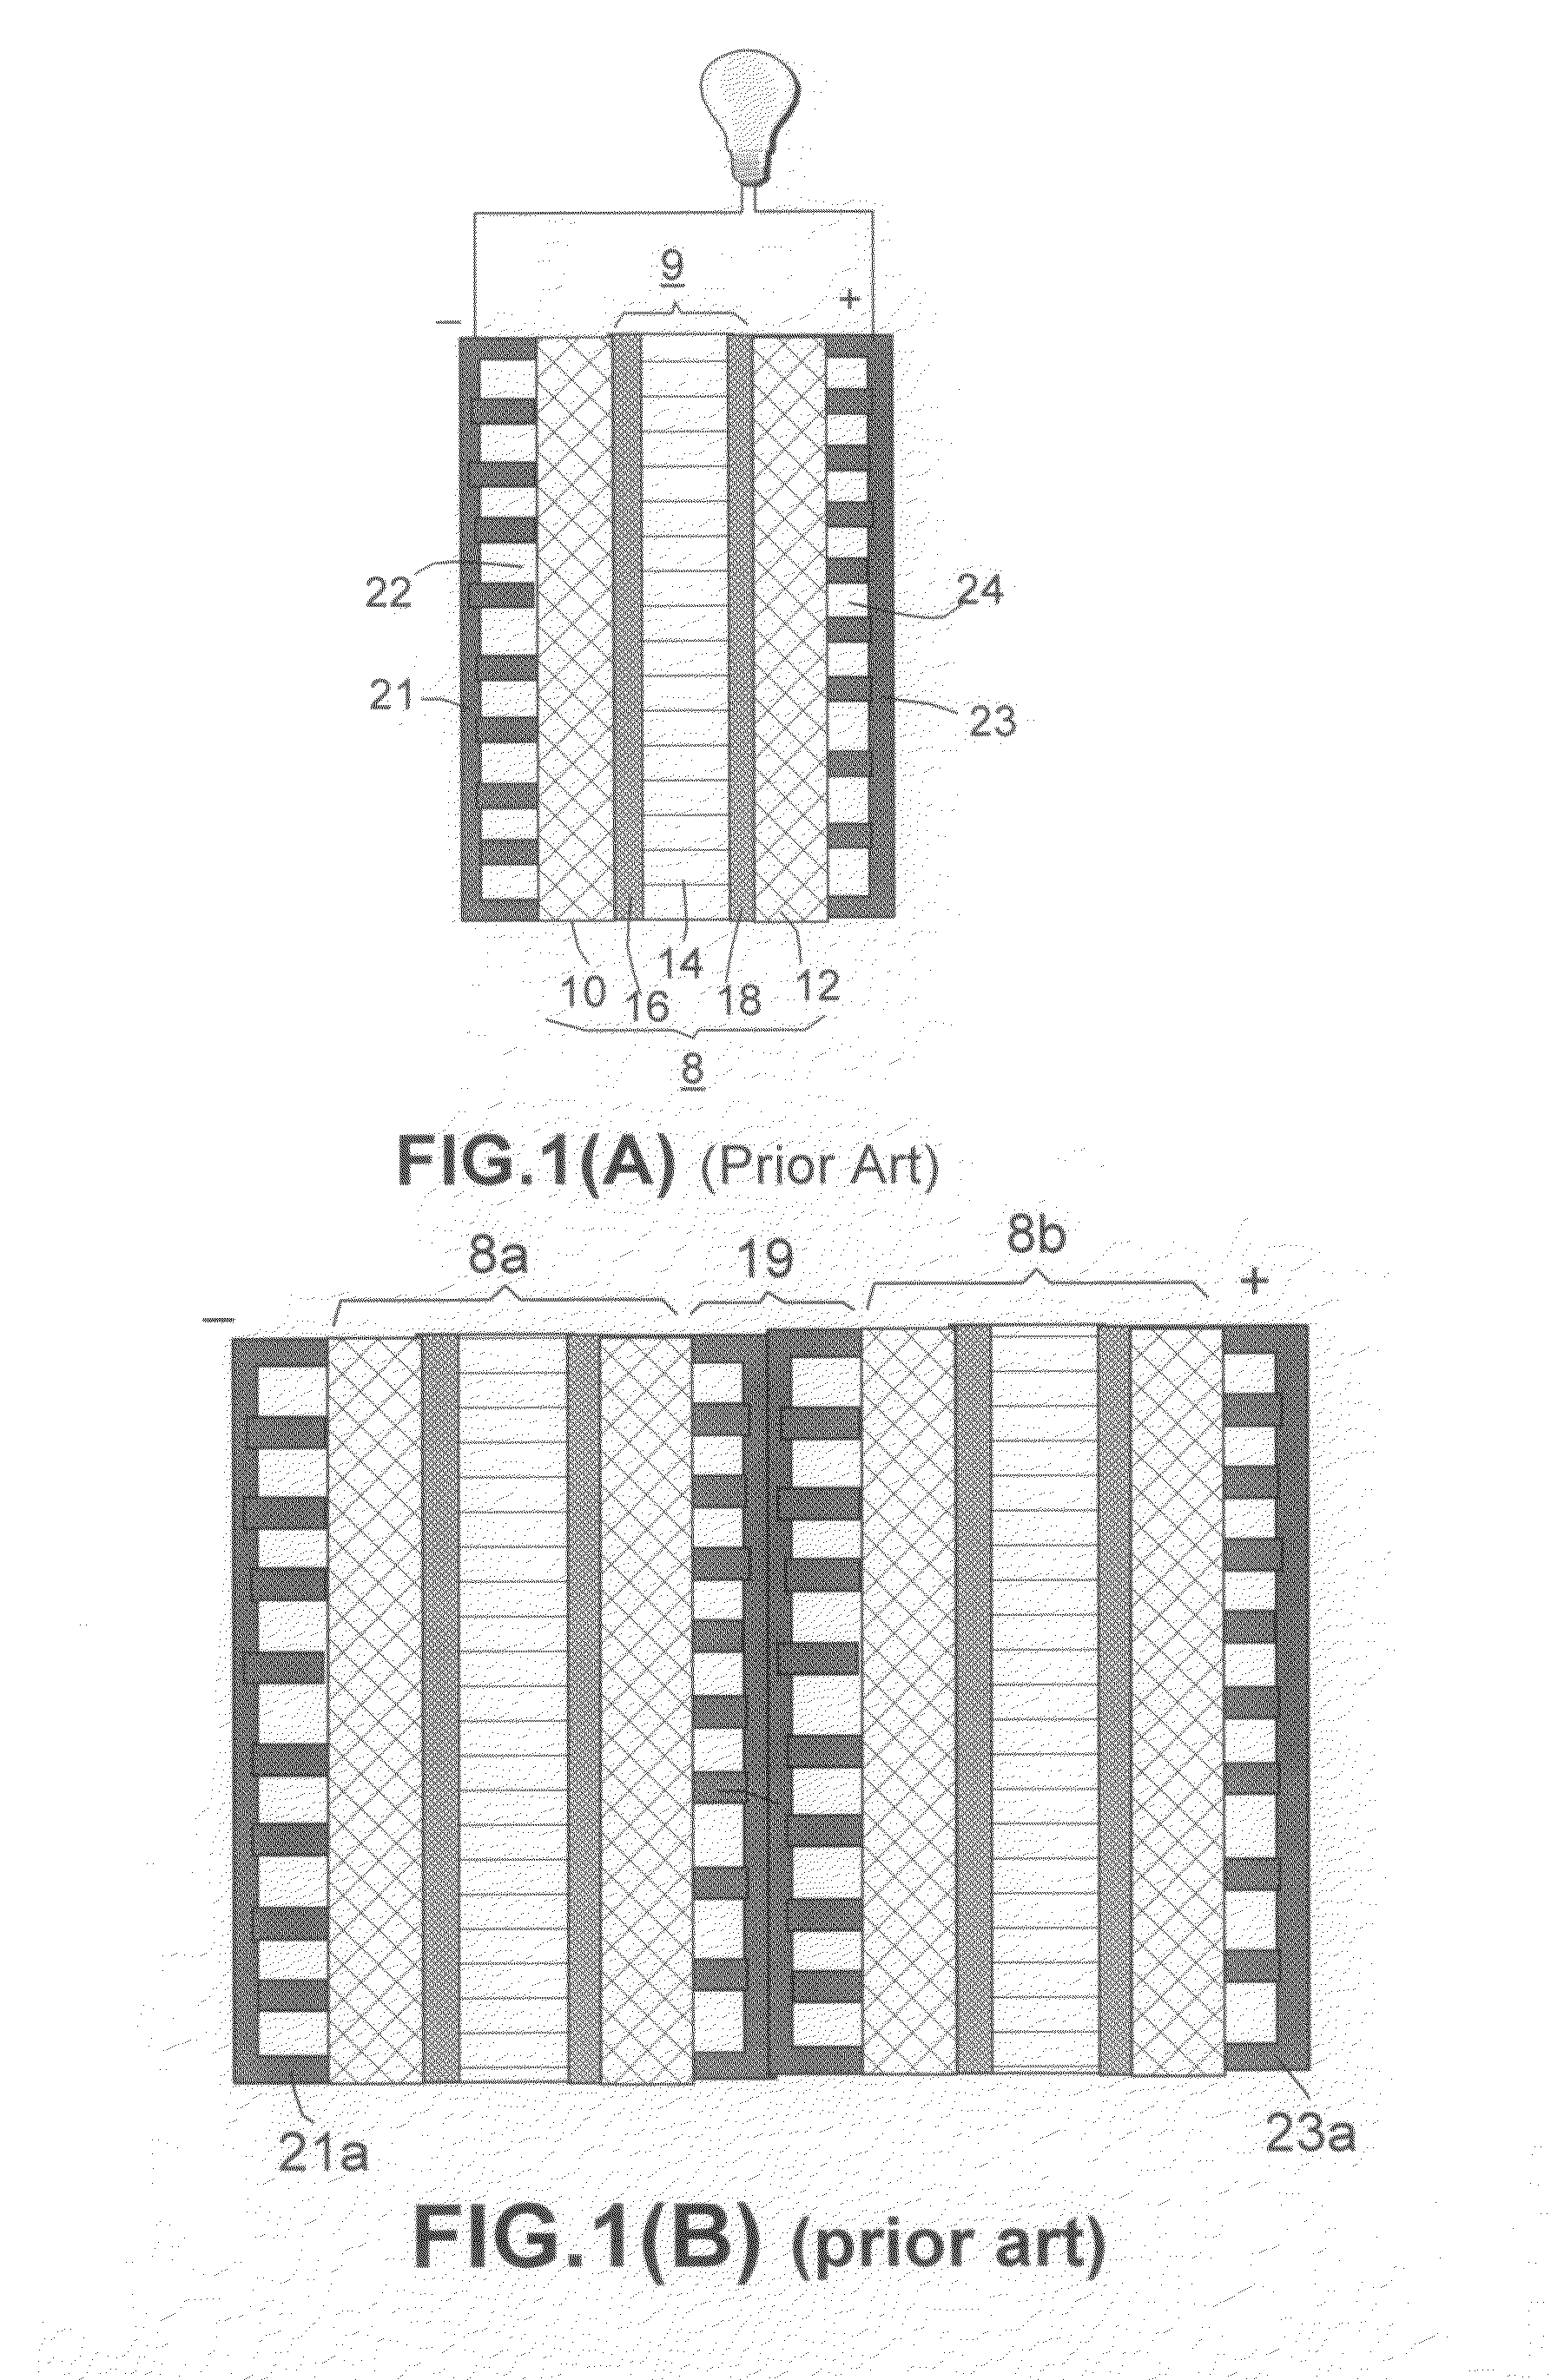 Process for producing laminated exfoliated graphite composite-metal compositions for fuel cell bipolar plate applications